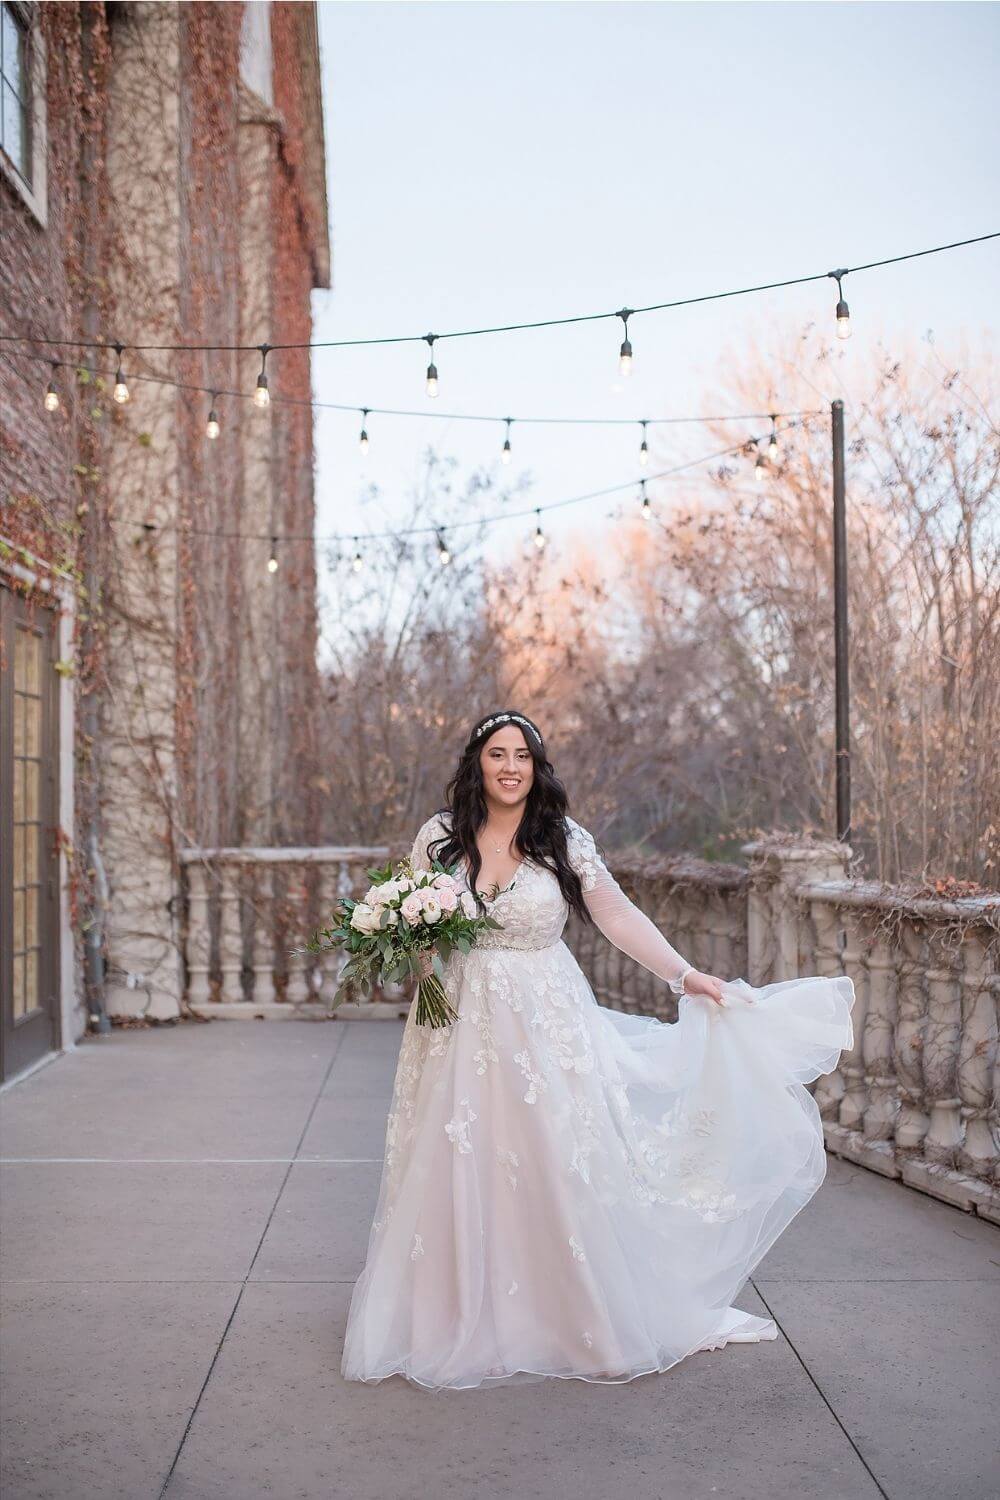 Bride in an A-line Wedding Dress photo by Gaby Pineda Photography